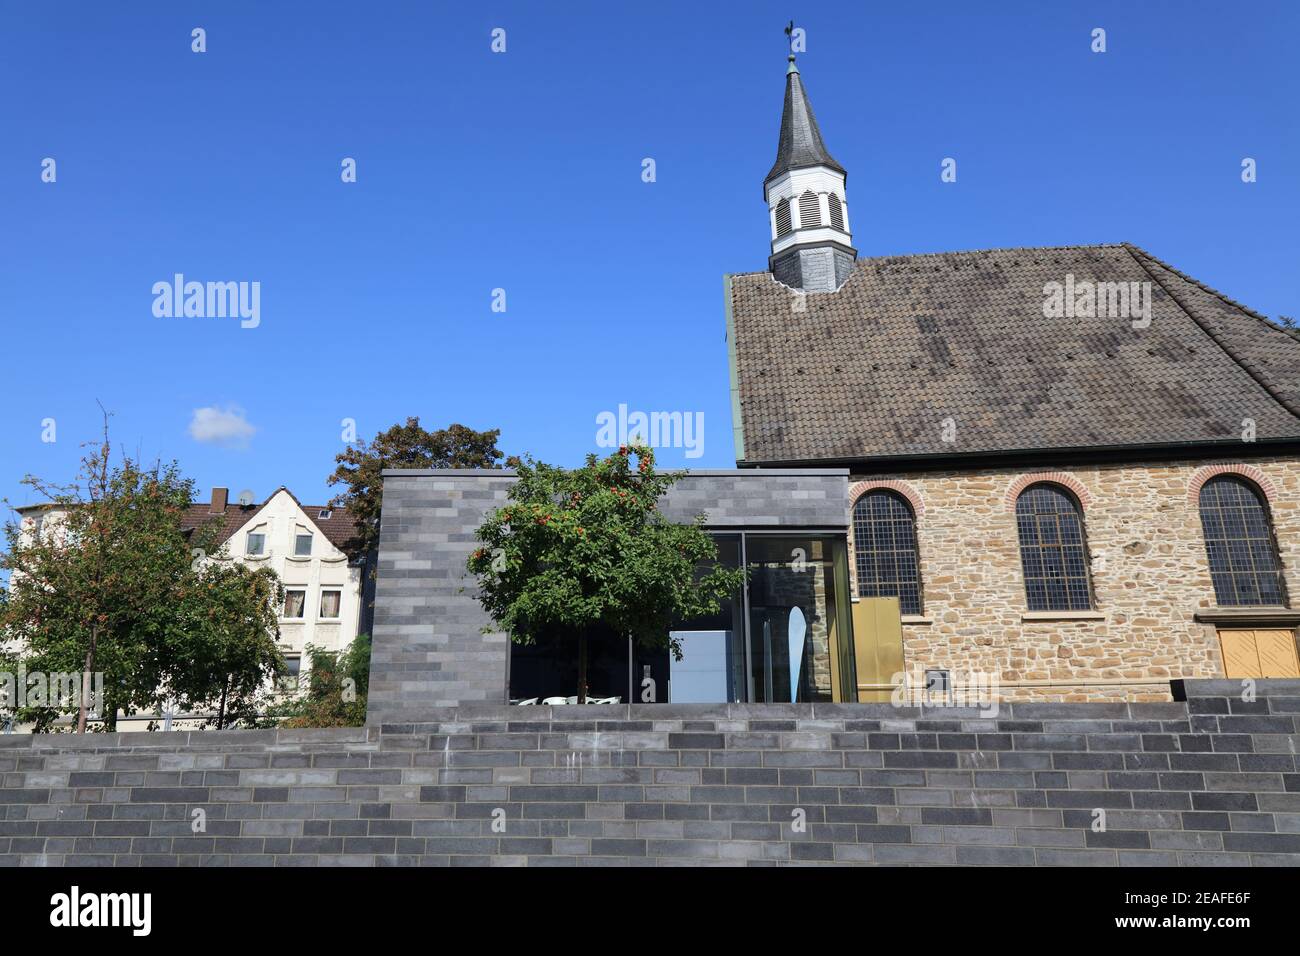 Wattenscheid, district of Bochum city in Germany. Evangelical protestant church. Stock Photo